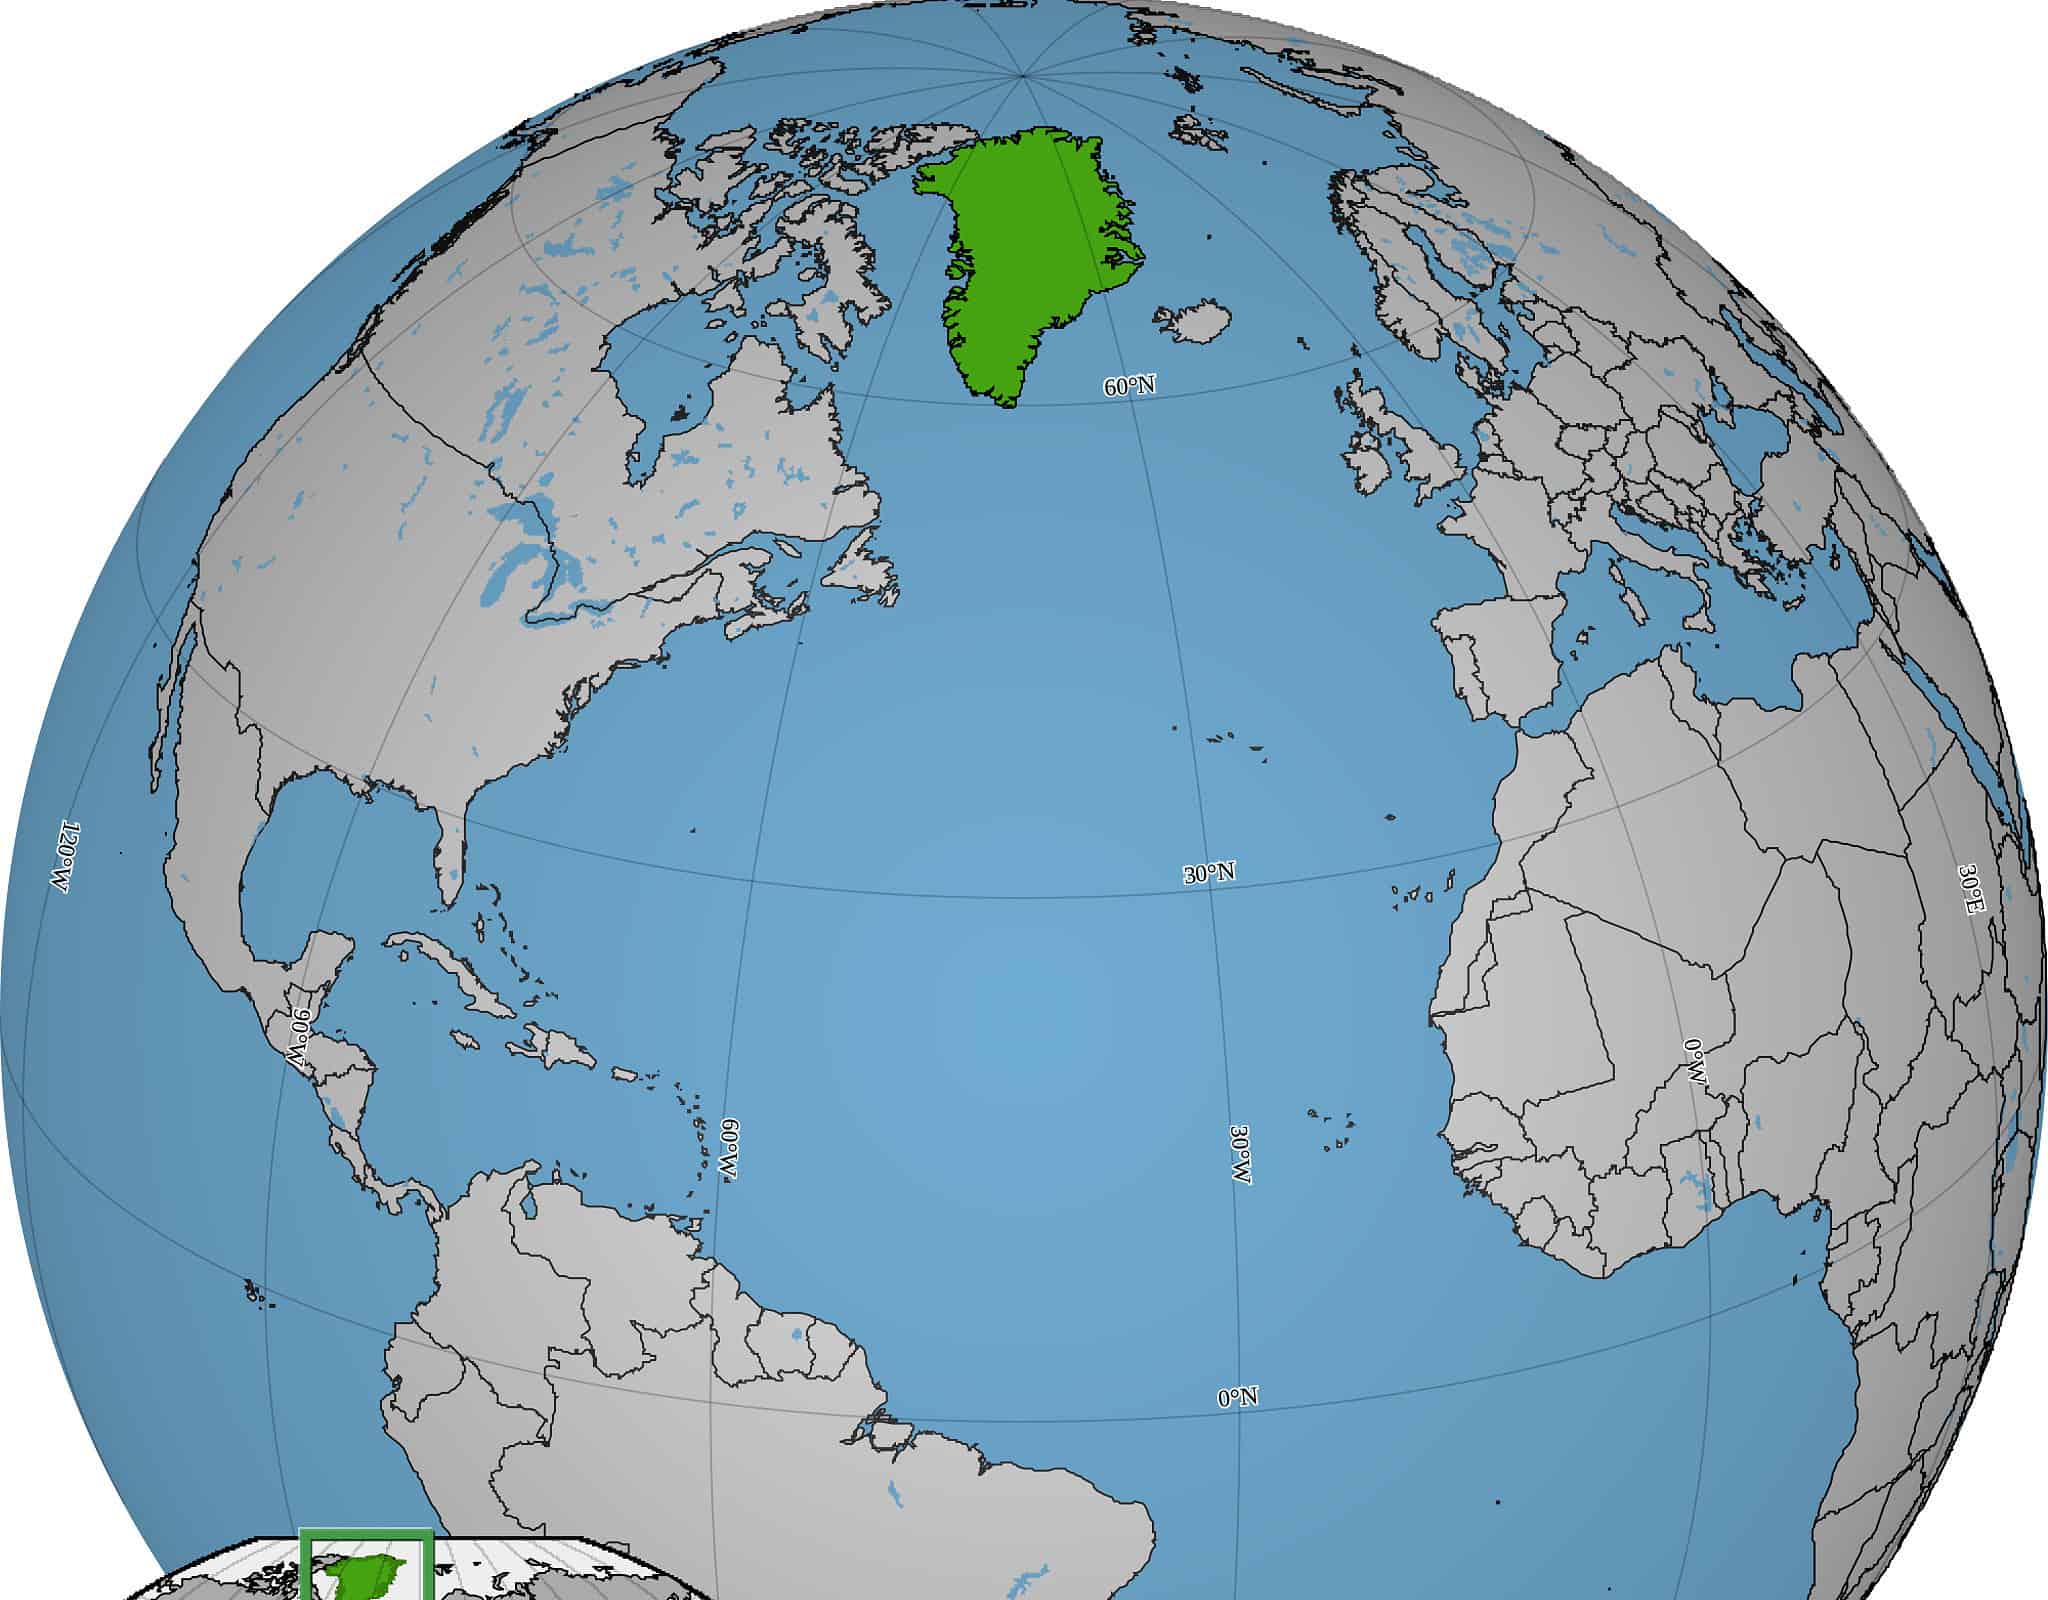 World map showing the location and shape of Greenland.